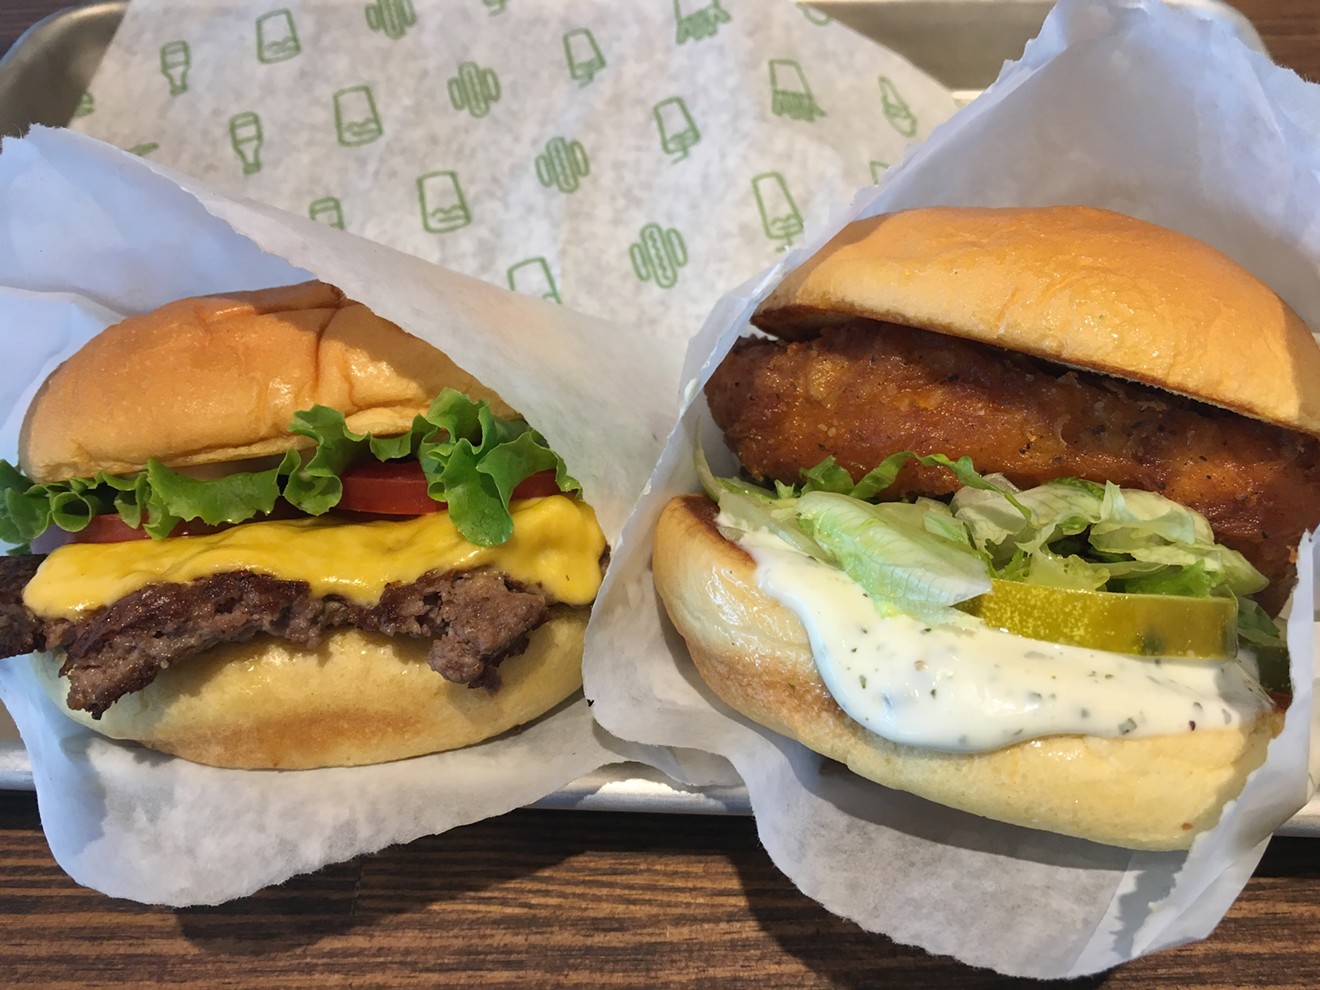 The ShackBurger and Chick'n Shack with dill pickles.